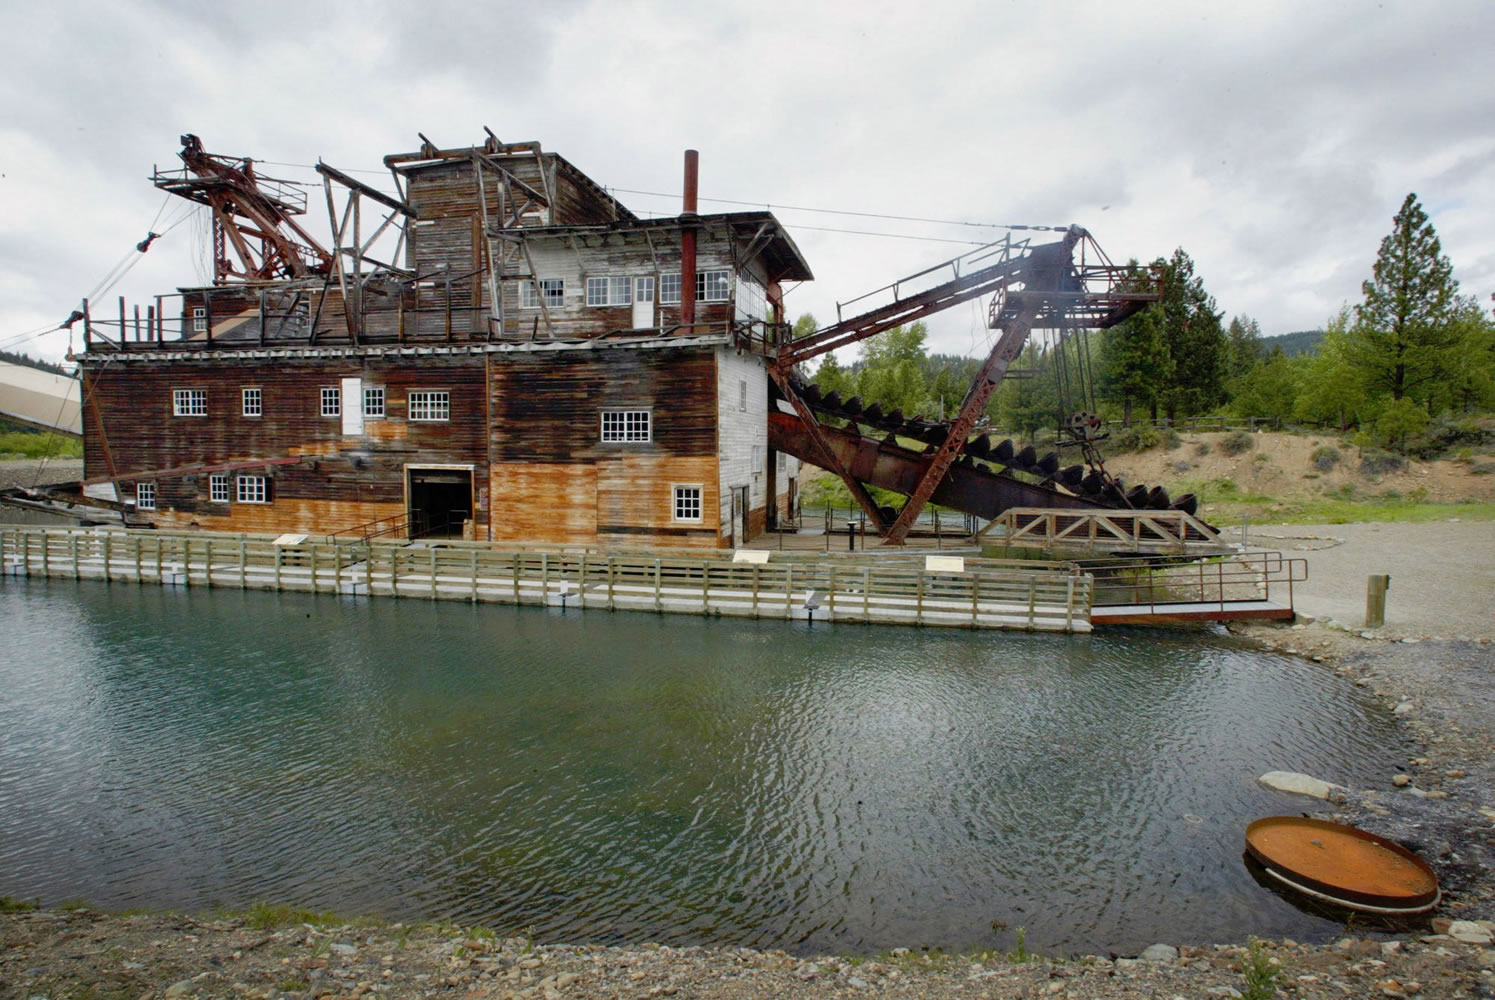 The Sumpter dredge, here in June 2004, was one of three that took some 9 tons of gold from the Sumpter Valley in Oregon. A ghost-themed reality TV show that was made last summer near Sumpter is scheduled to debut Jan. 16 on the Syfy network.